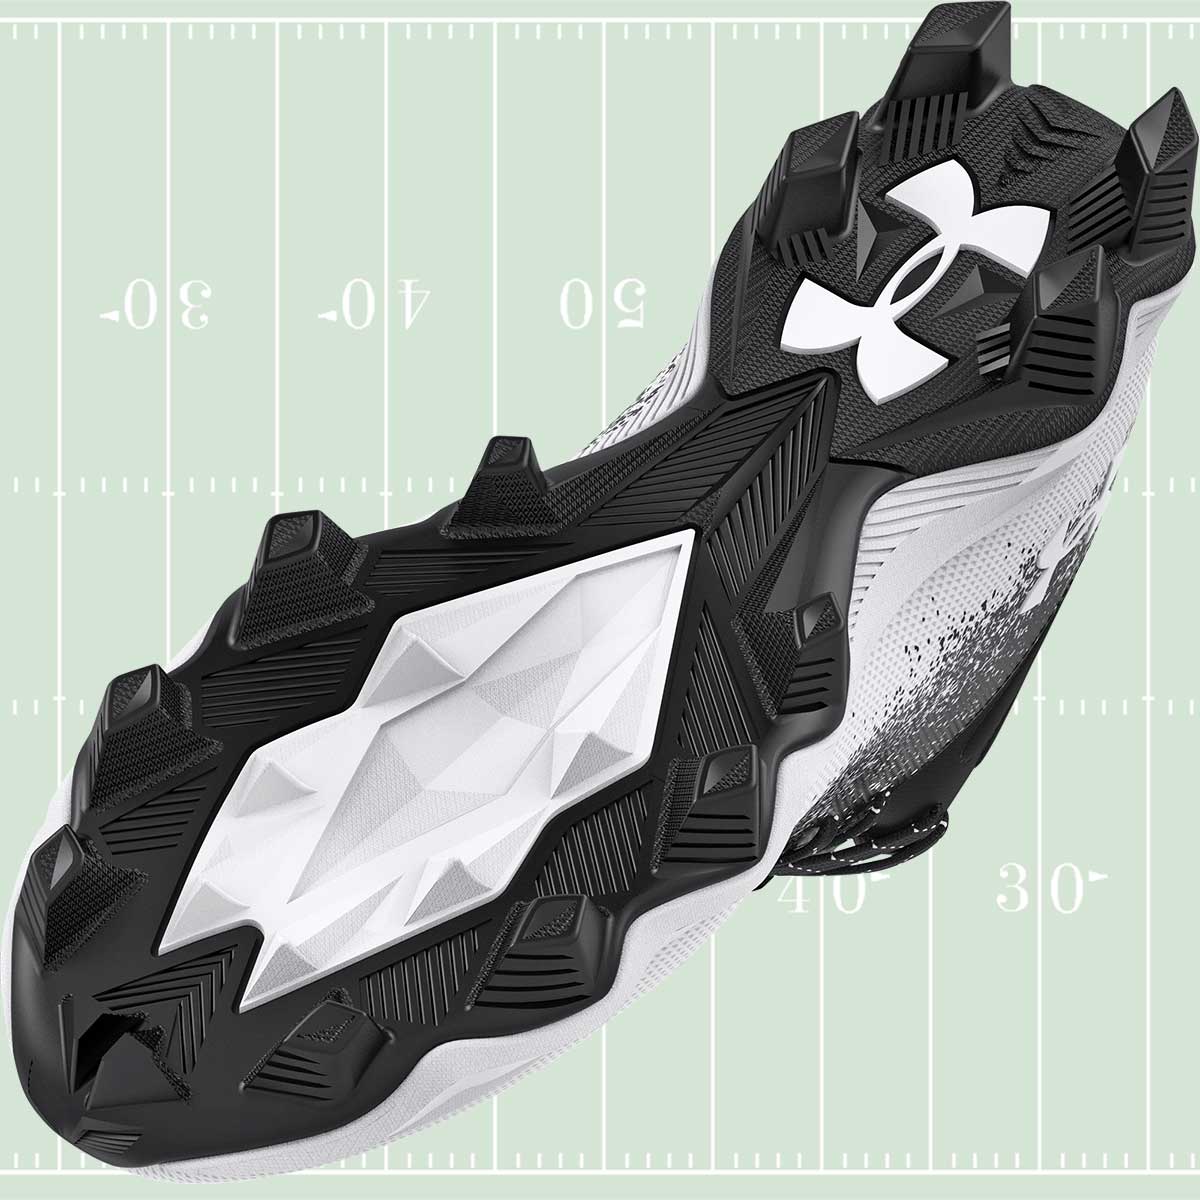 Under Armour Spotlight Mid RM Jr. Youth Football Cleats - Rubber Outsole